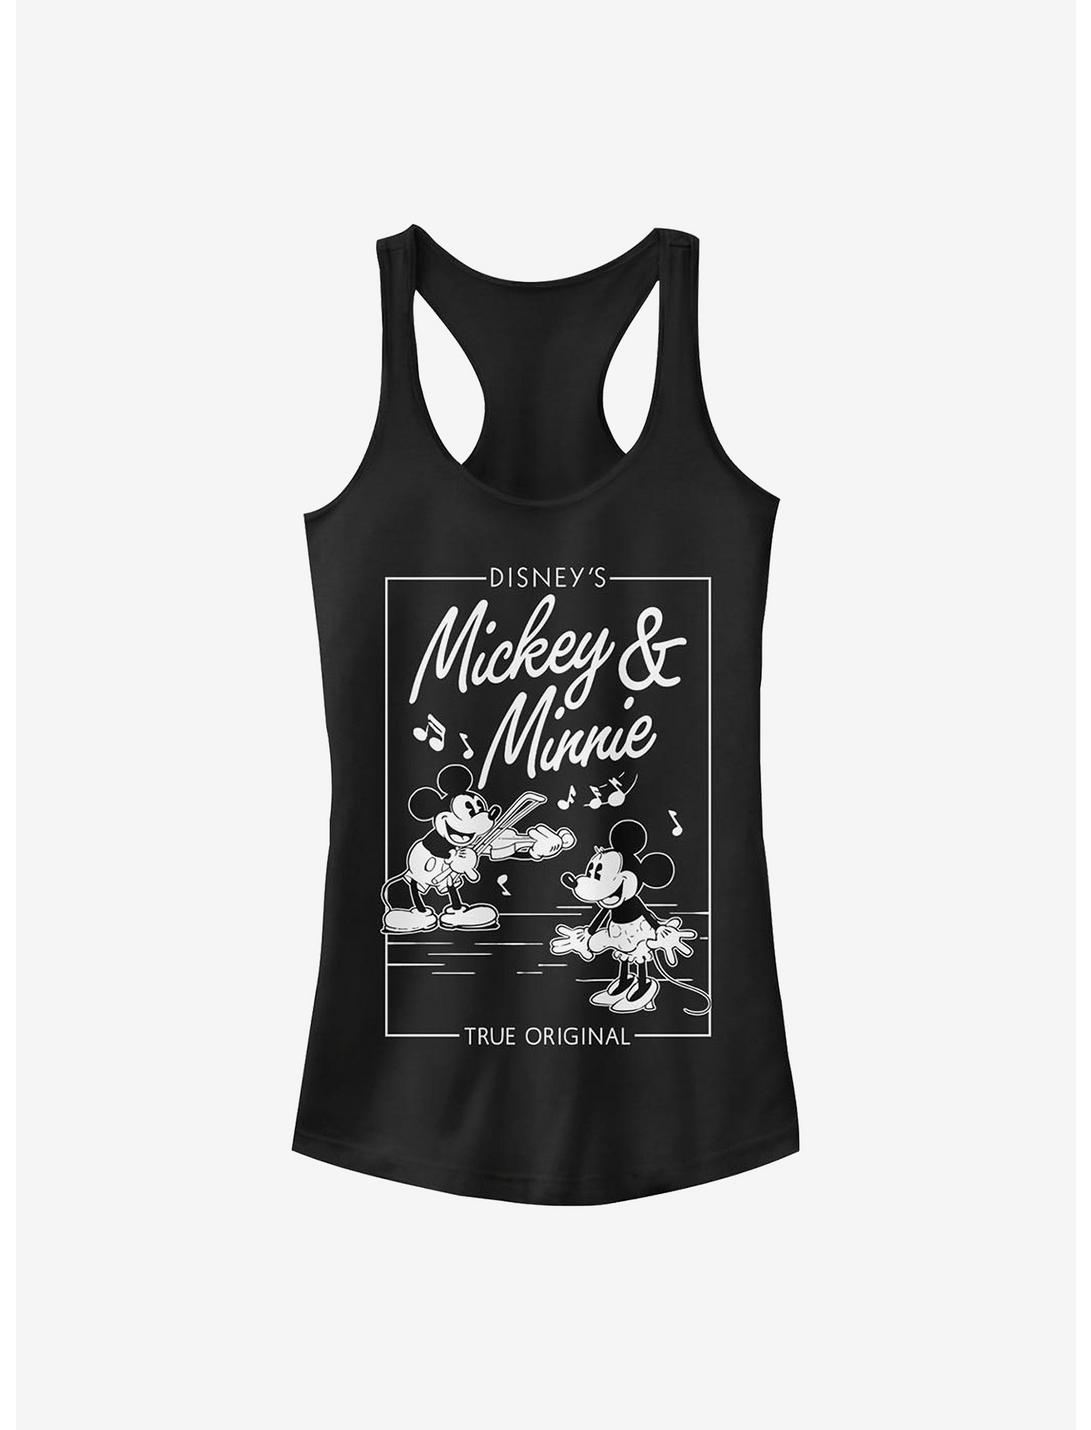 Disney Mickey Mouse & Minnie Mouse Music Cover Girls Tank Top, BLACK, hi-res